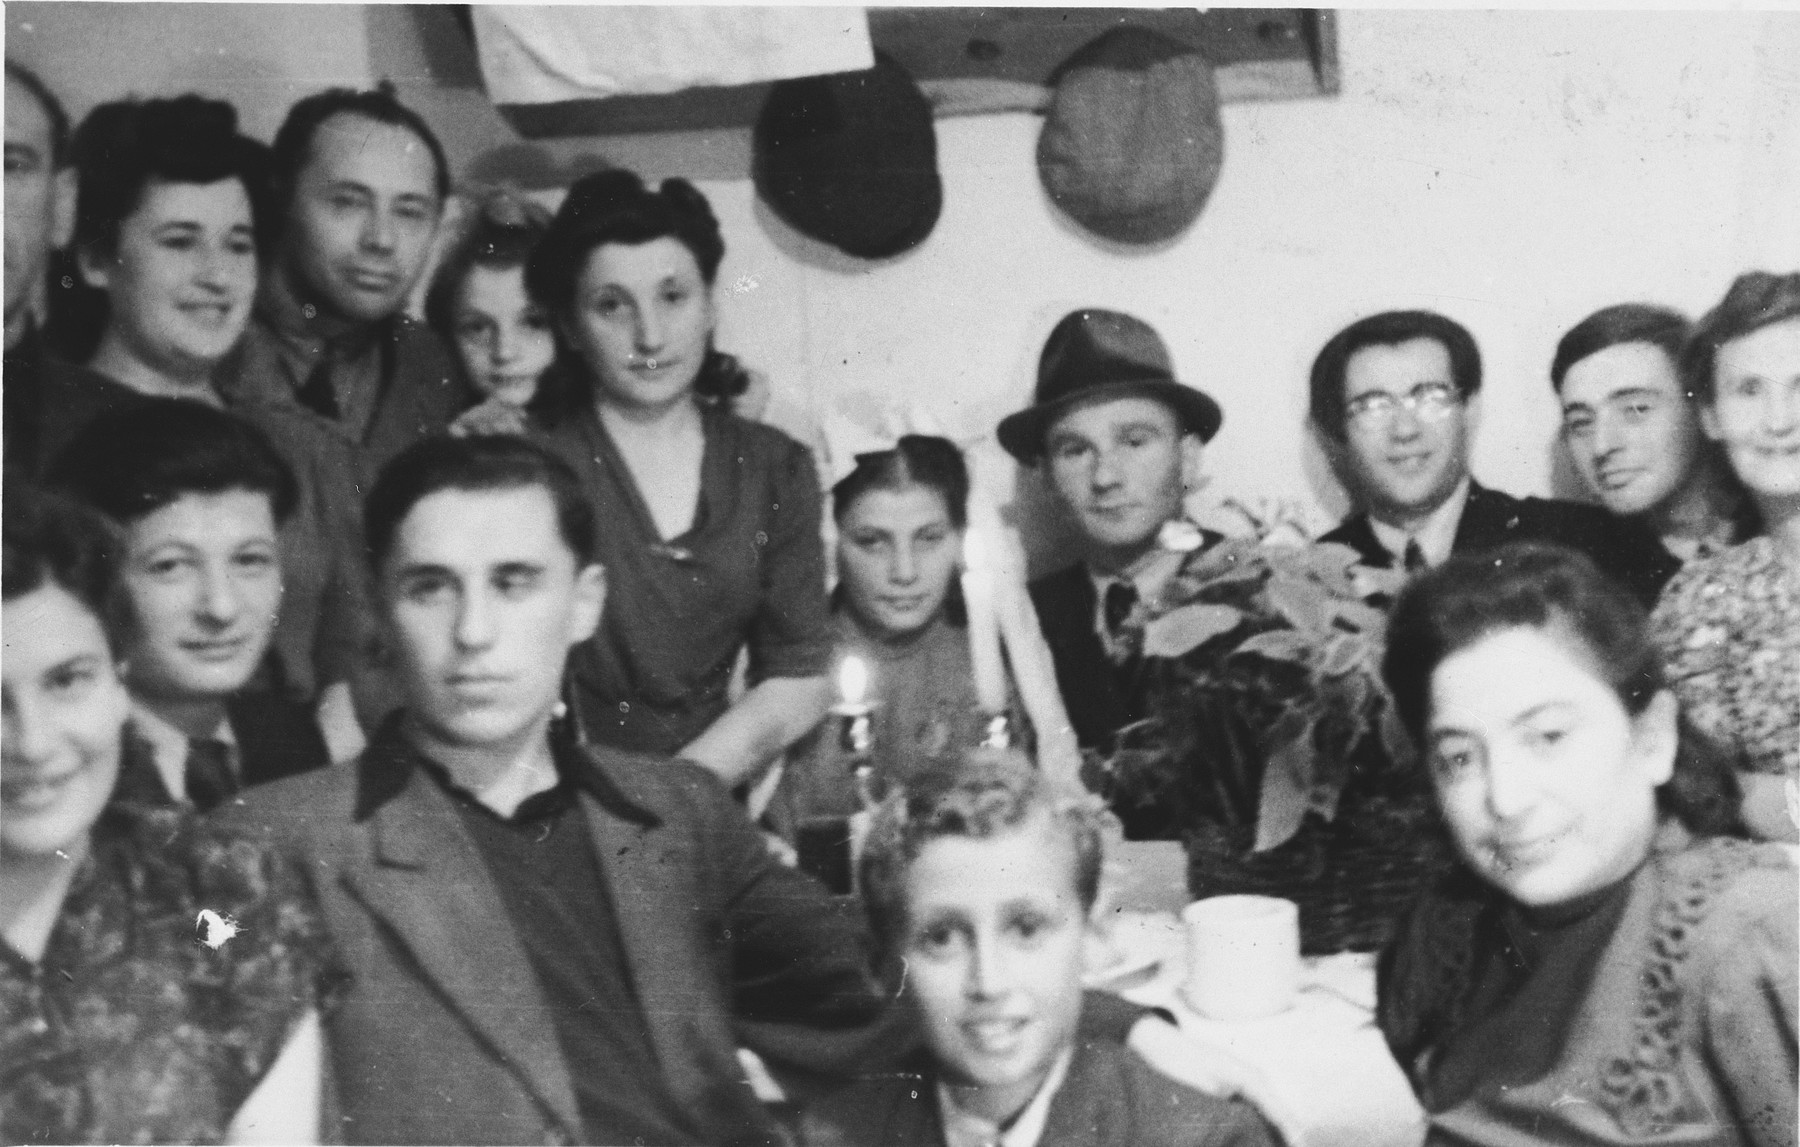 A wedding party gathers around a table with two candles in the Schlachtensee displaced persons camp.

The inscription on the back reads, "Ilub Piemiazek/I Liberman."